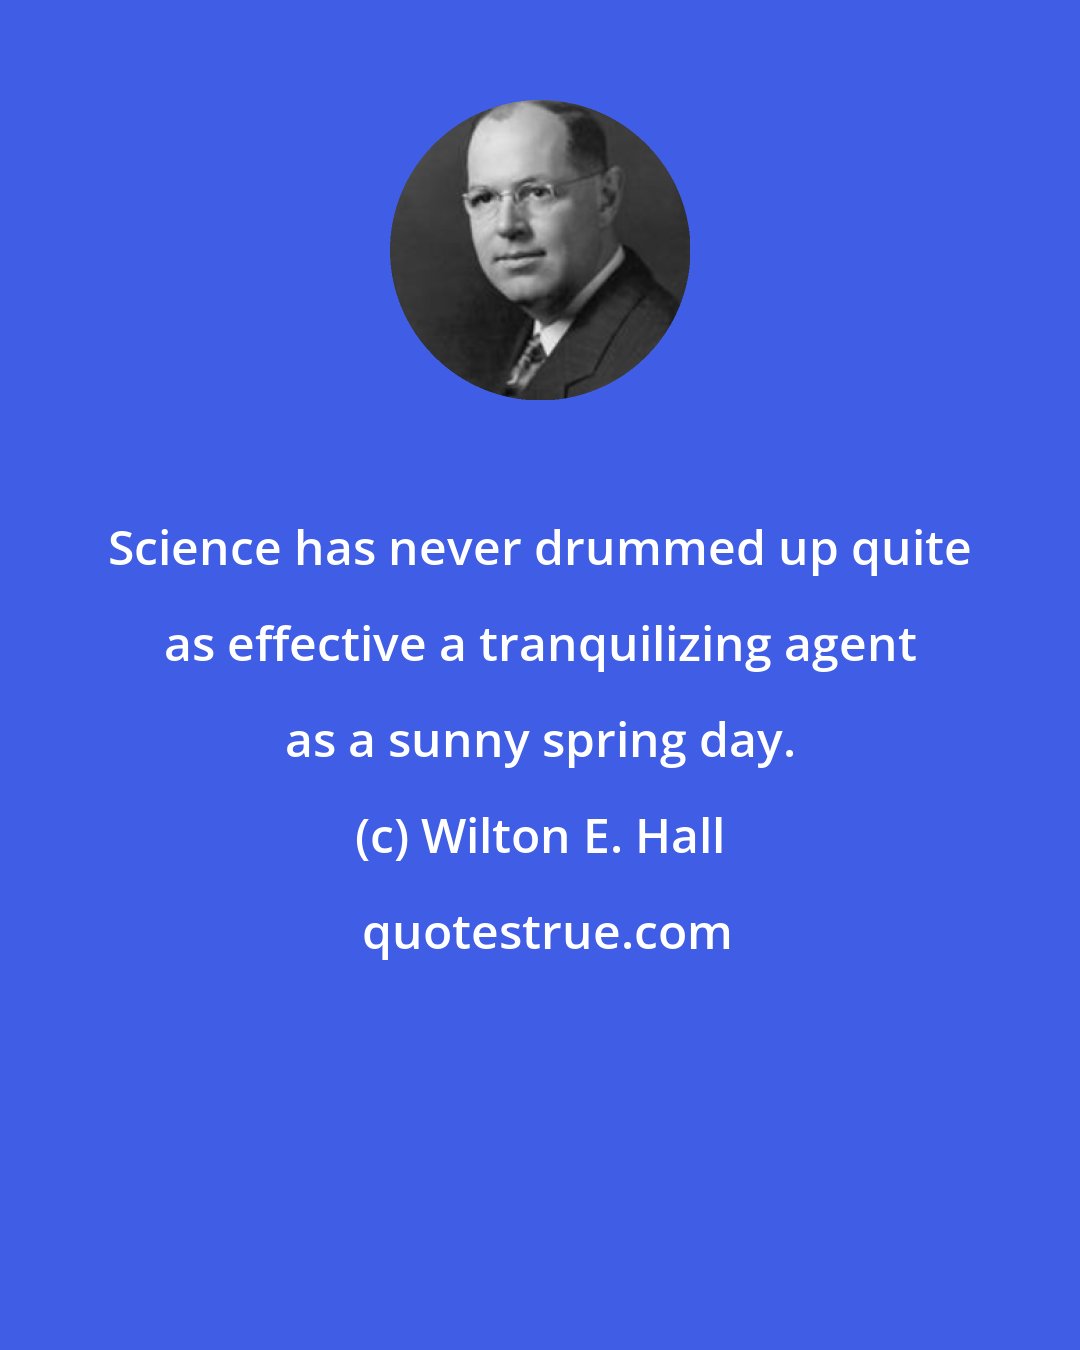 Wilton E. Hall: Science has never drummed up quite as effective a tranquilizing agent as a sunny spring day.